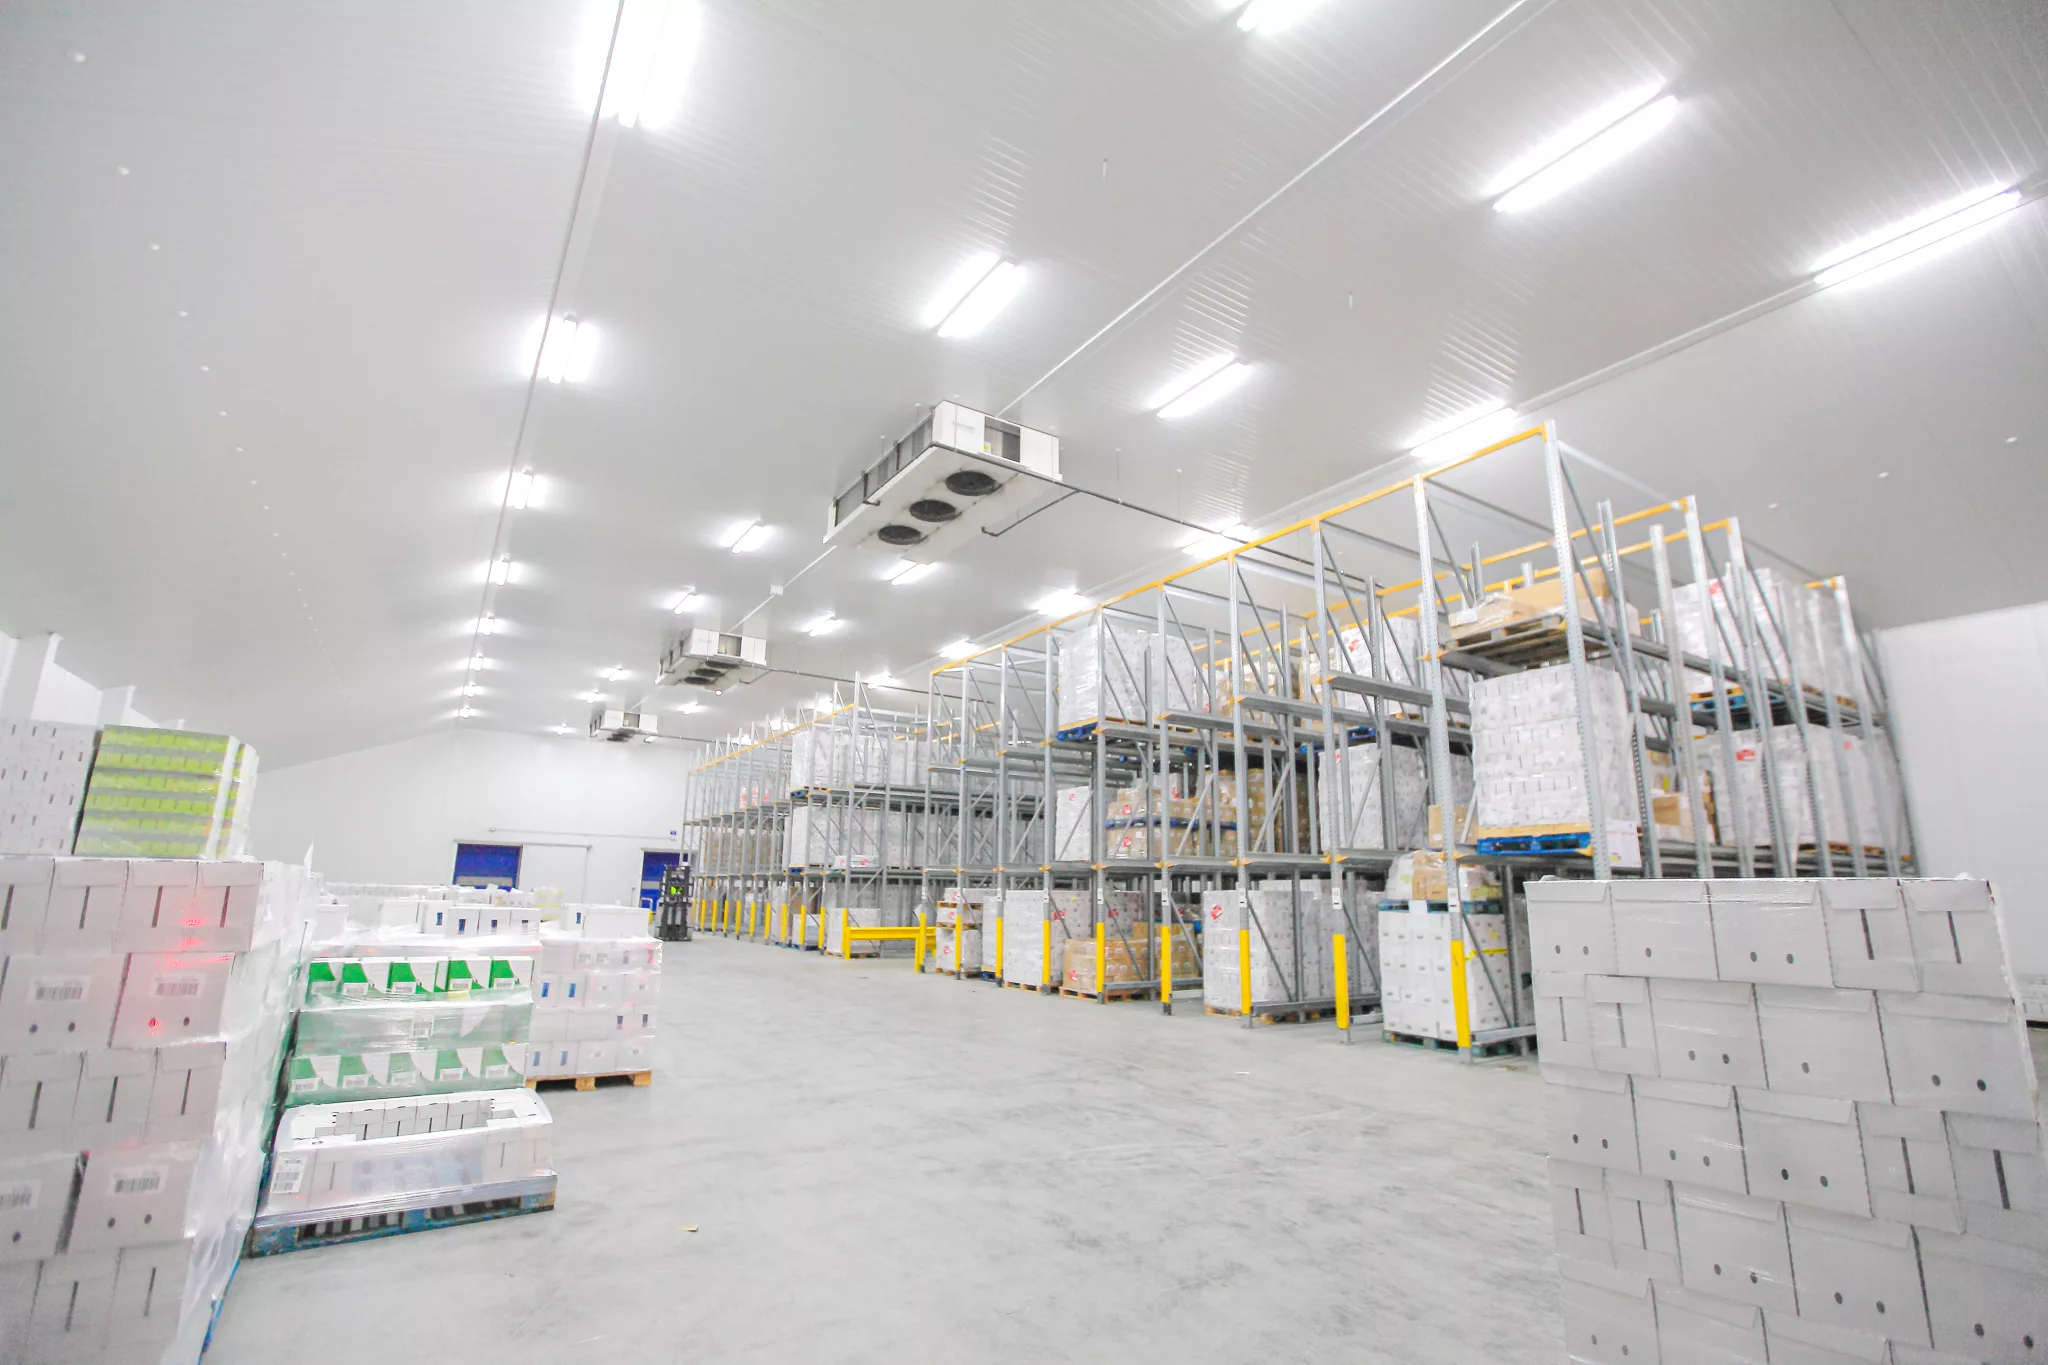 Refrigeration projects: Fulfillment Centers - Grocery Stores - Cold Storage Warehouses - Pharmaceutical Centers - Bio-pharma Cold Distribution center - Electrical design - Electrical Installation